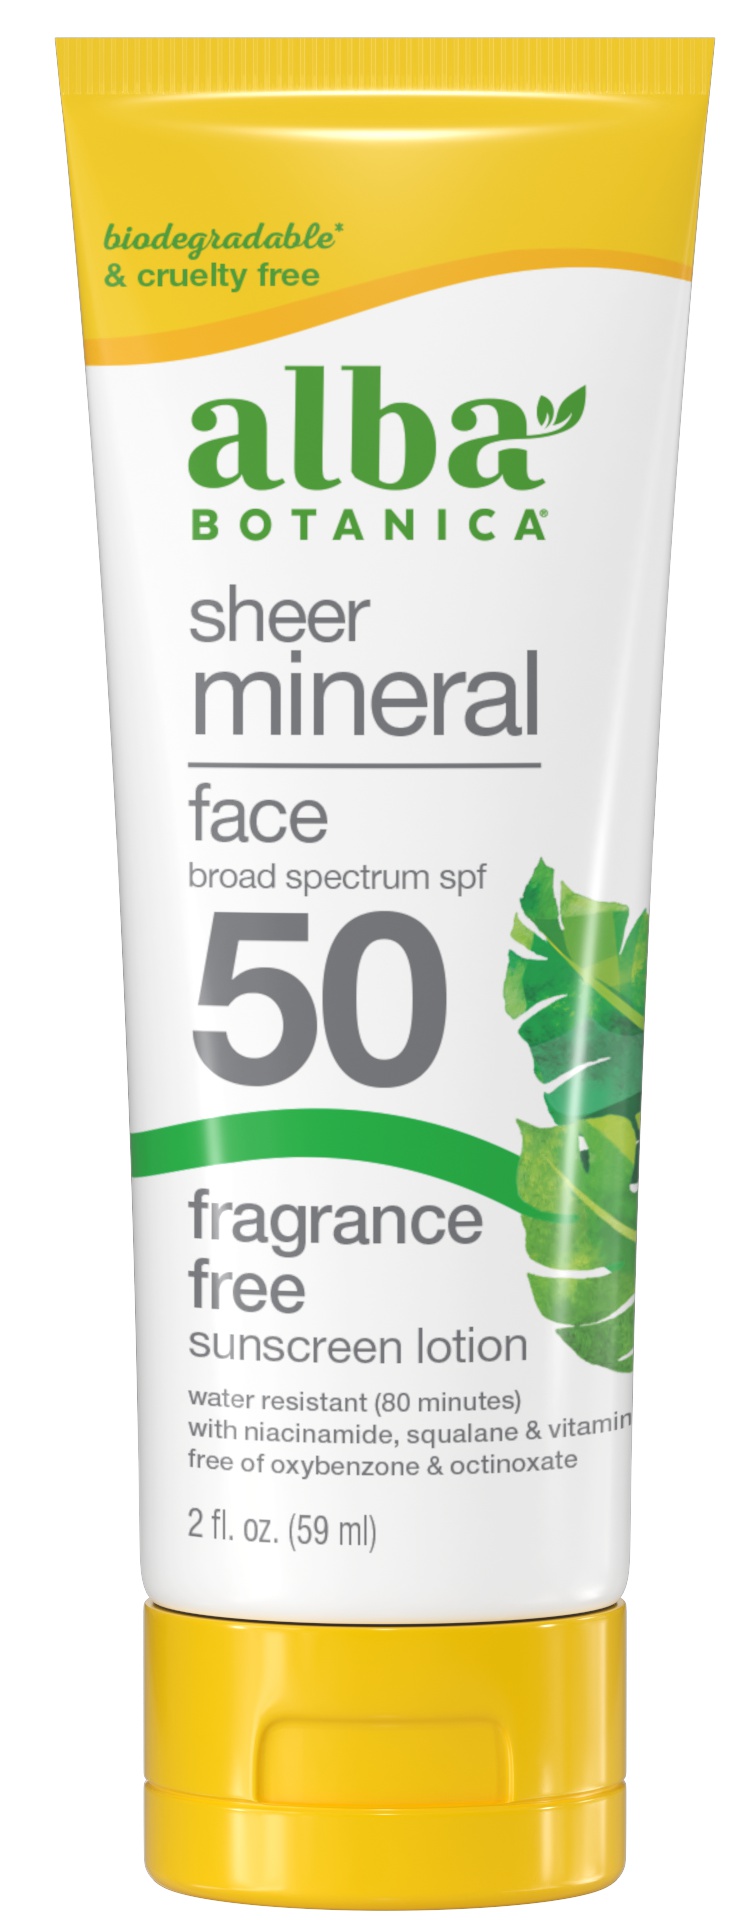 Alba Botanica Sunscreen For Face, Fragrance-free Sheer Mineral Face Sunscreen Lotion, Broad Spectrum SPF 50